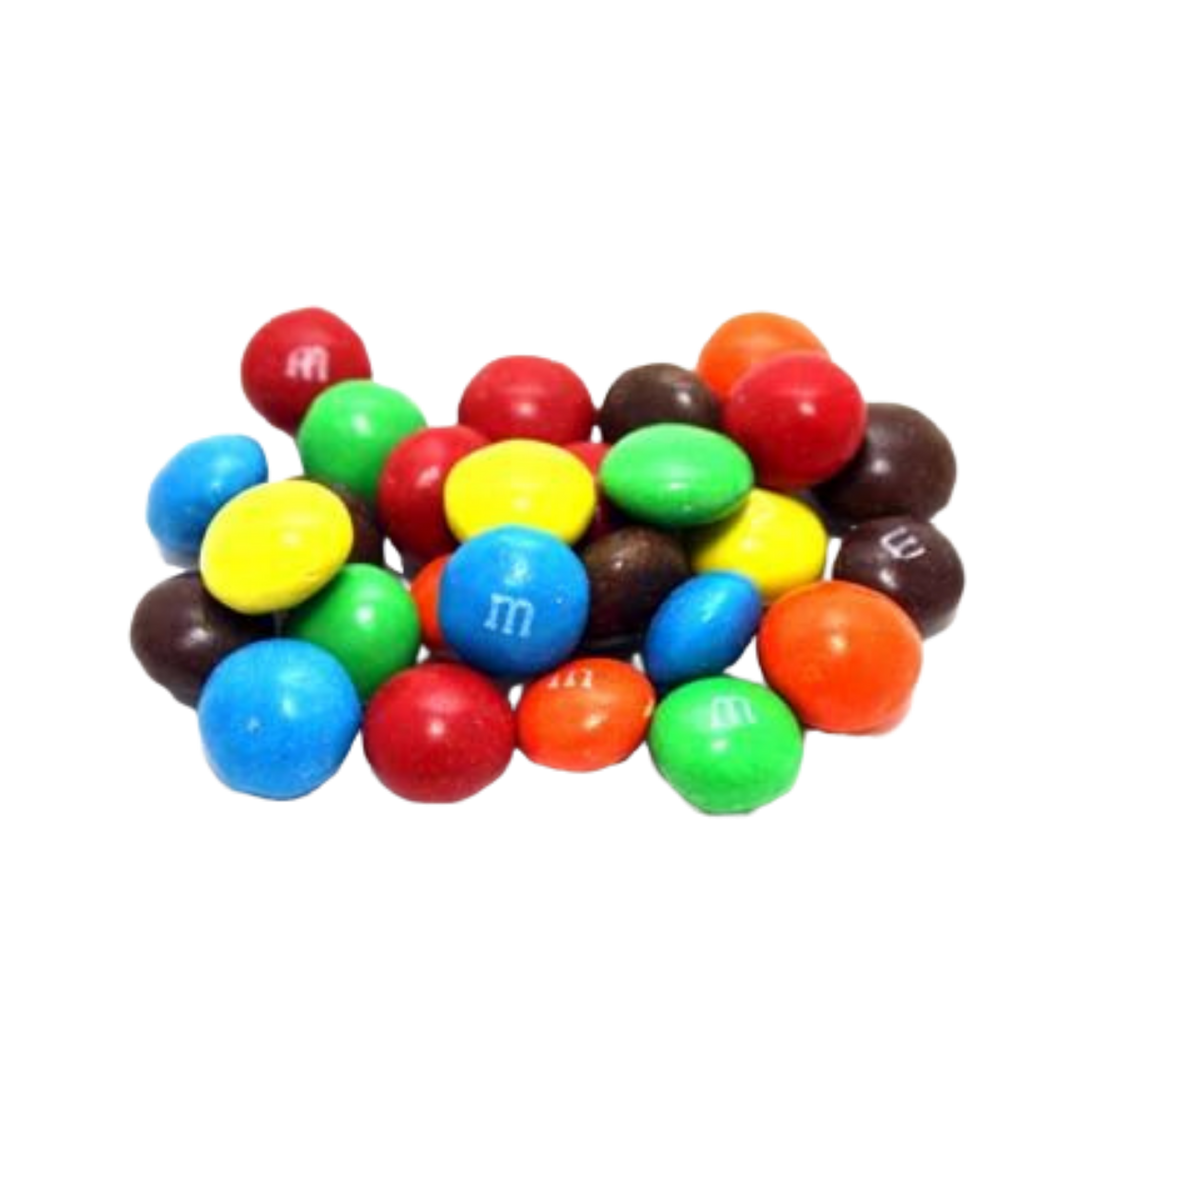 M&M Biscuit Bar Pack  Australia Wide Shipping